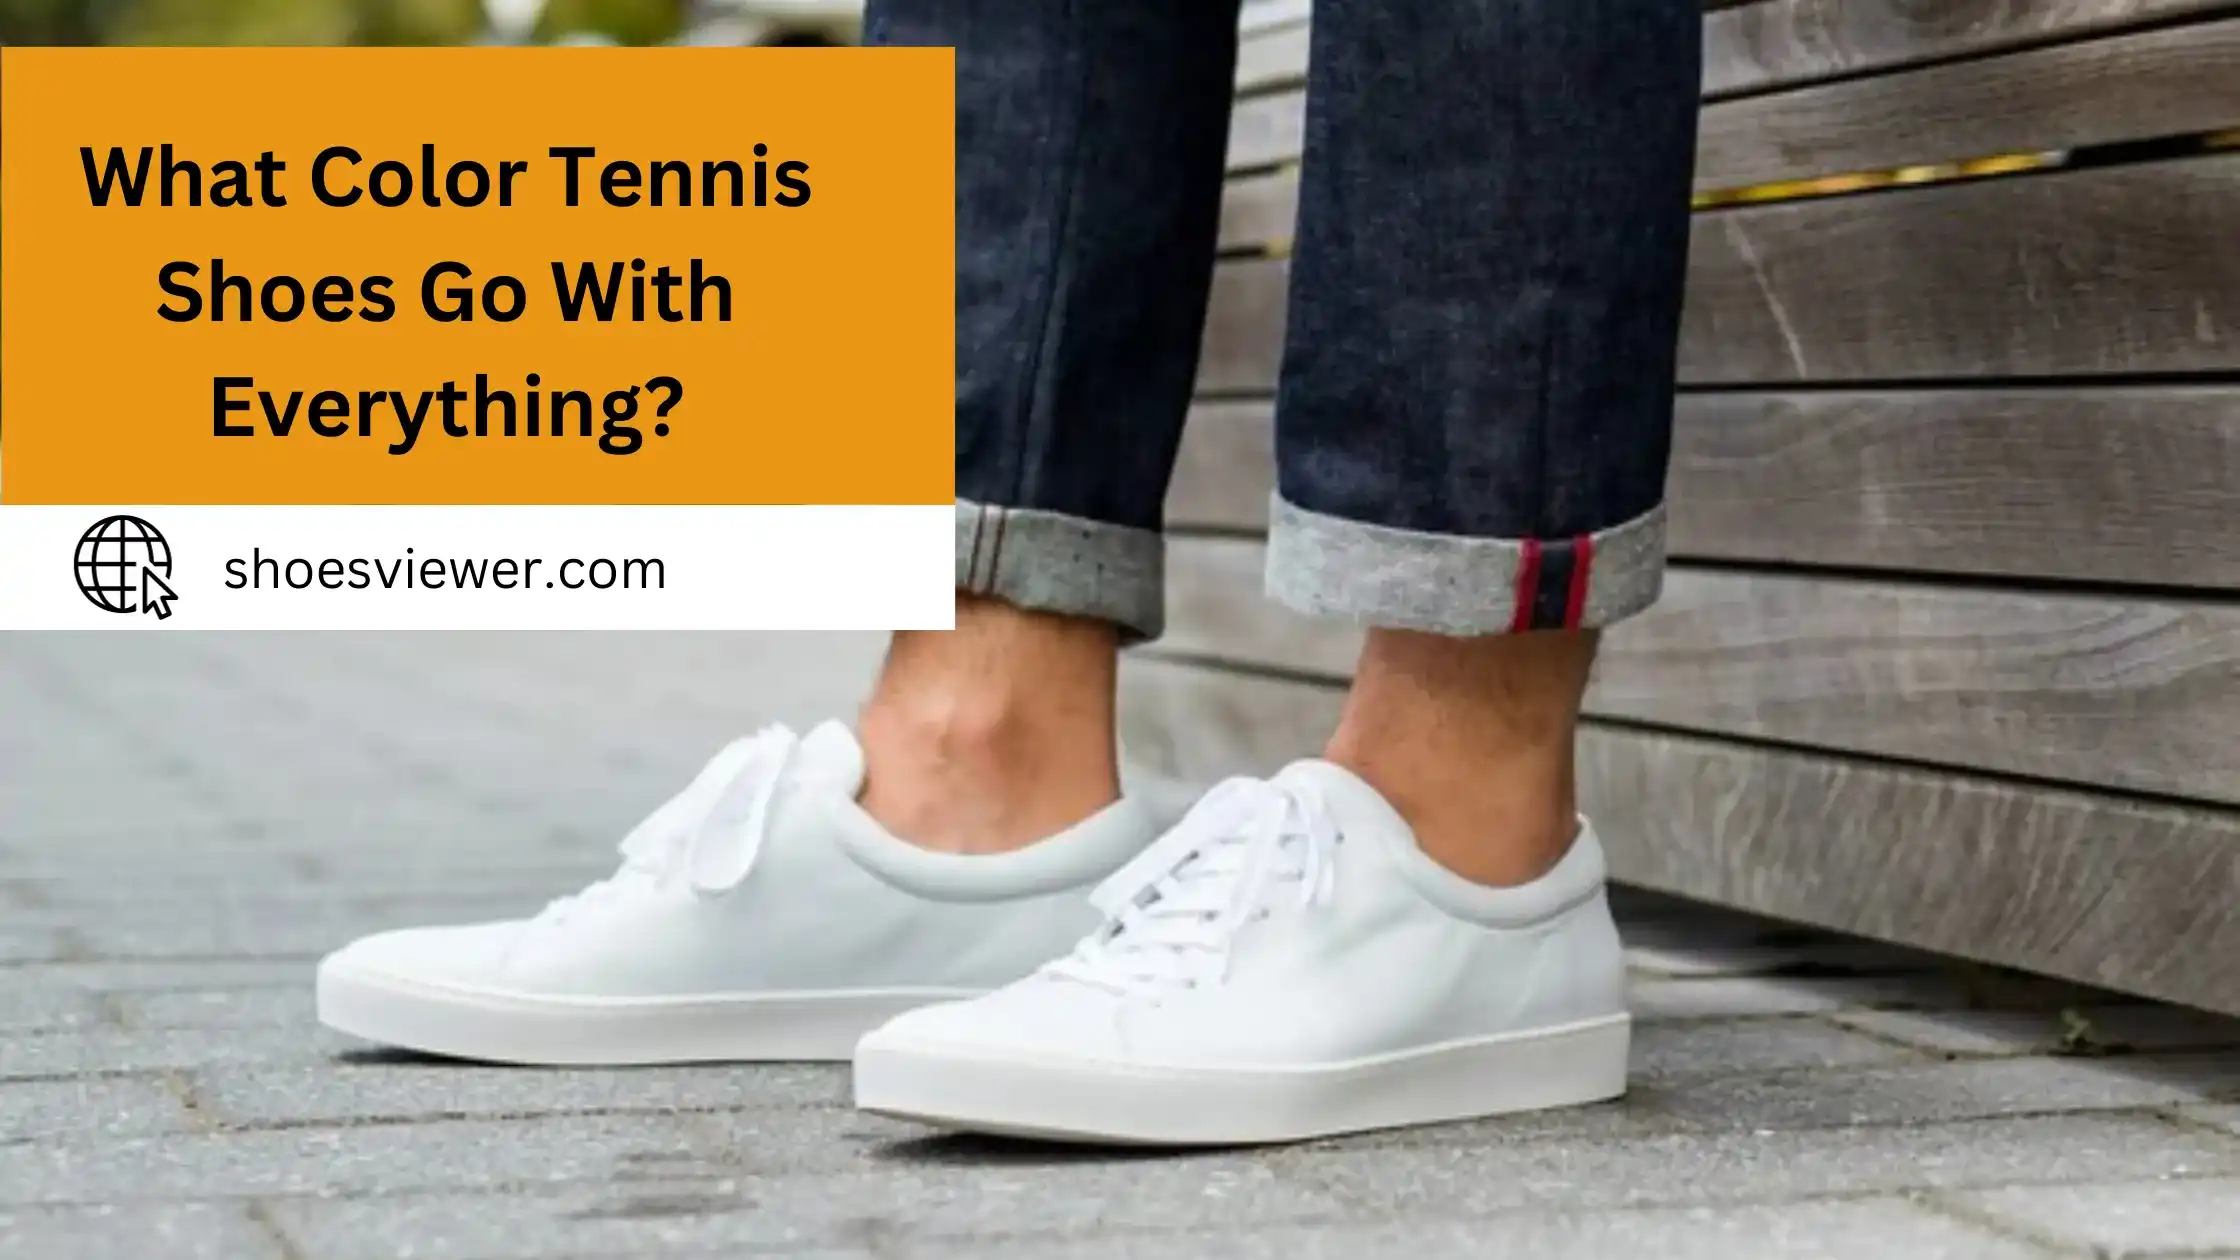 What Color Tennis Shoes Go With Everything? Expert Choice